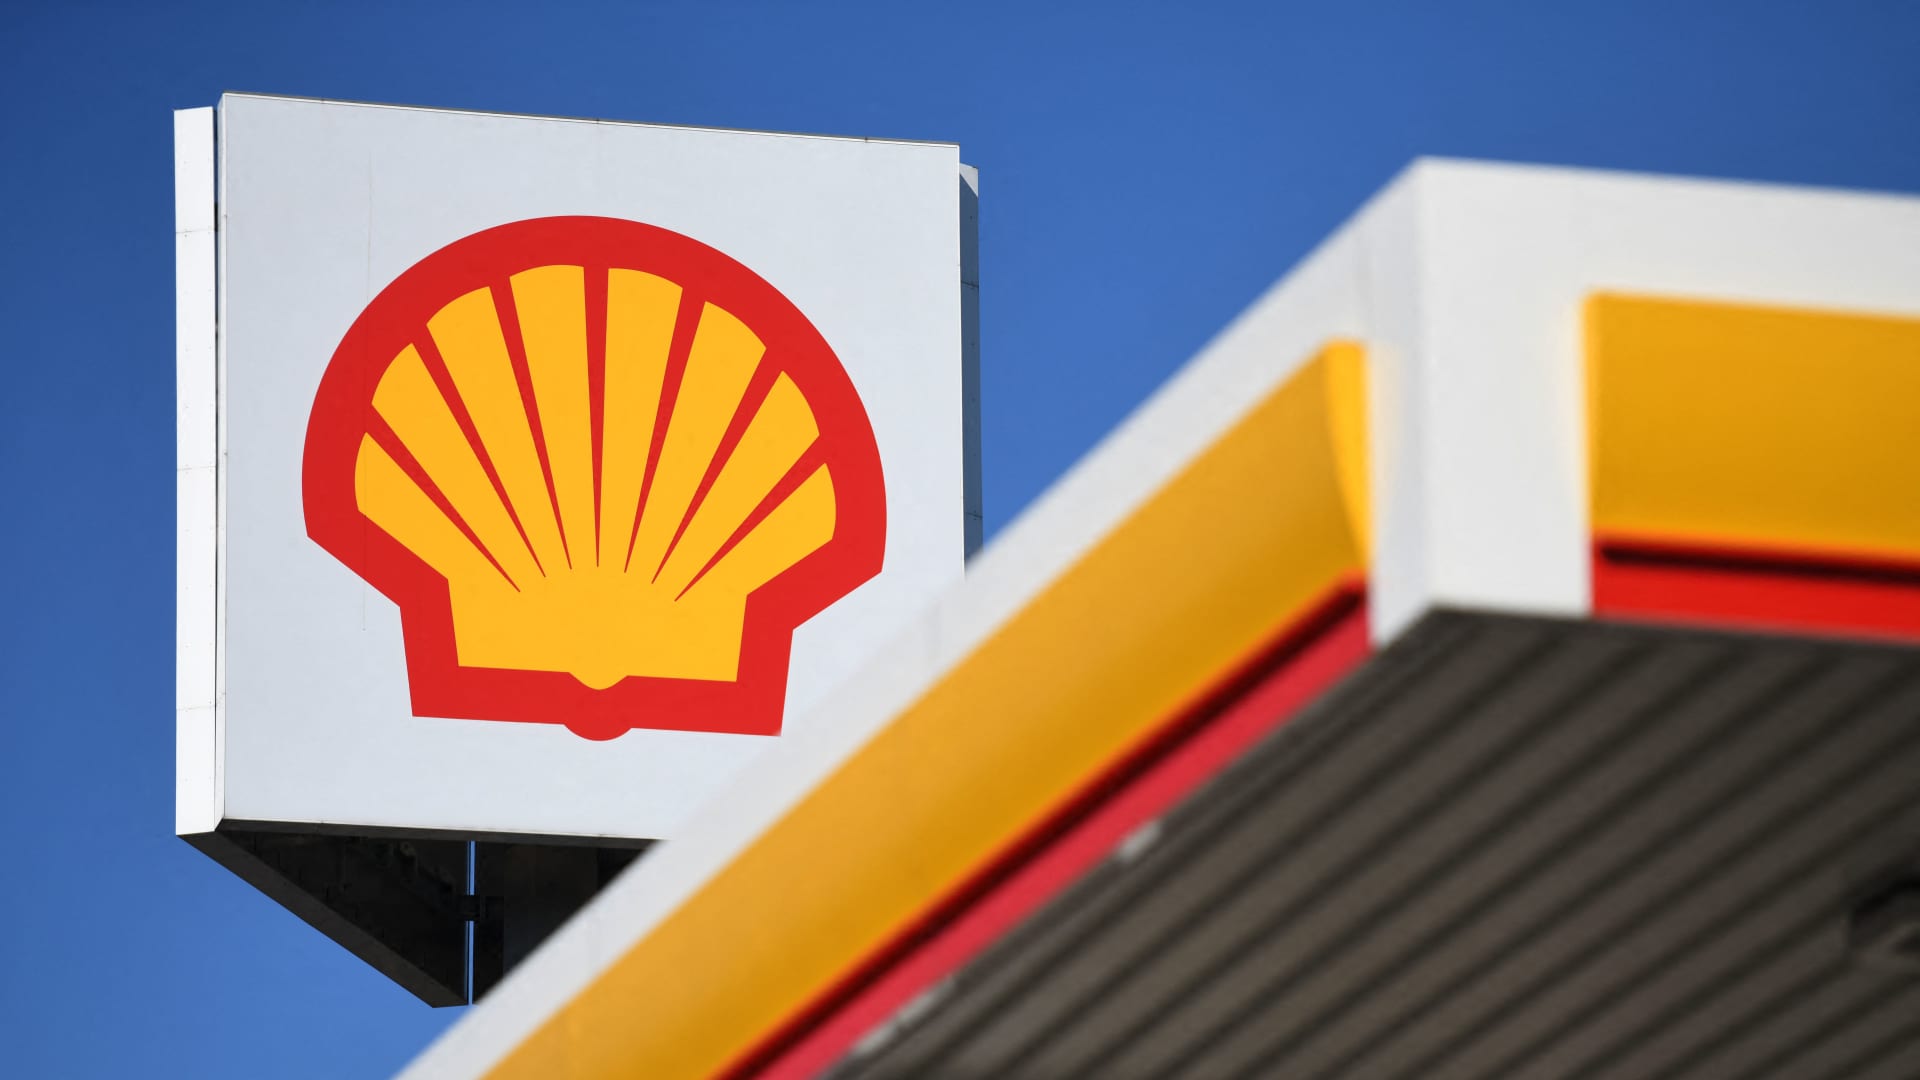 EDF says top sellers like Shell, for example, are well positioned to pilot climate-aligned asset transfers.